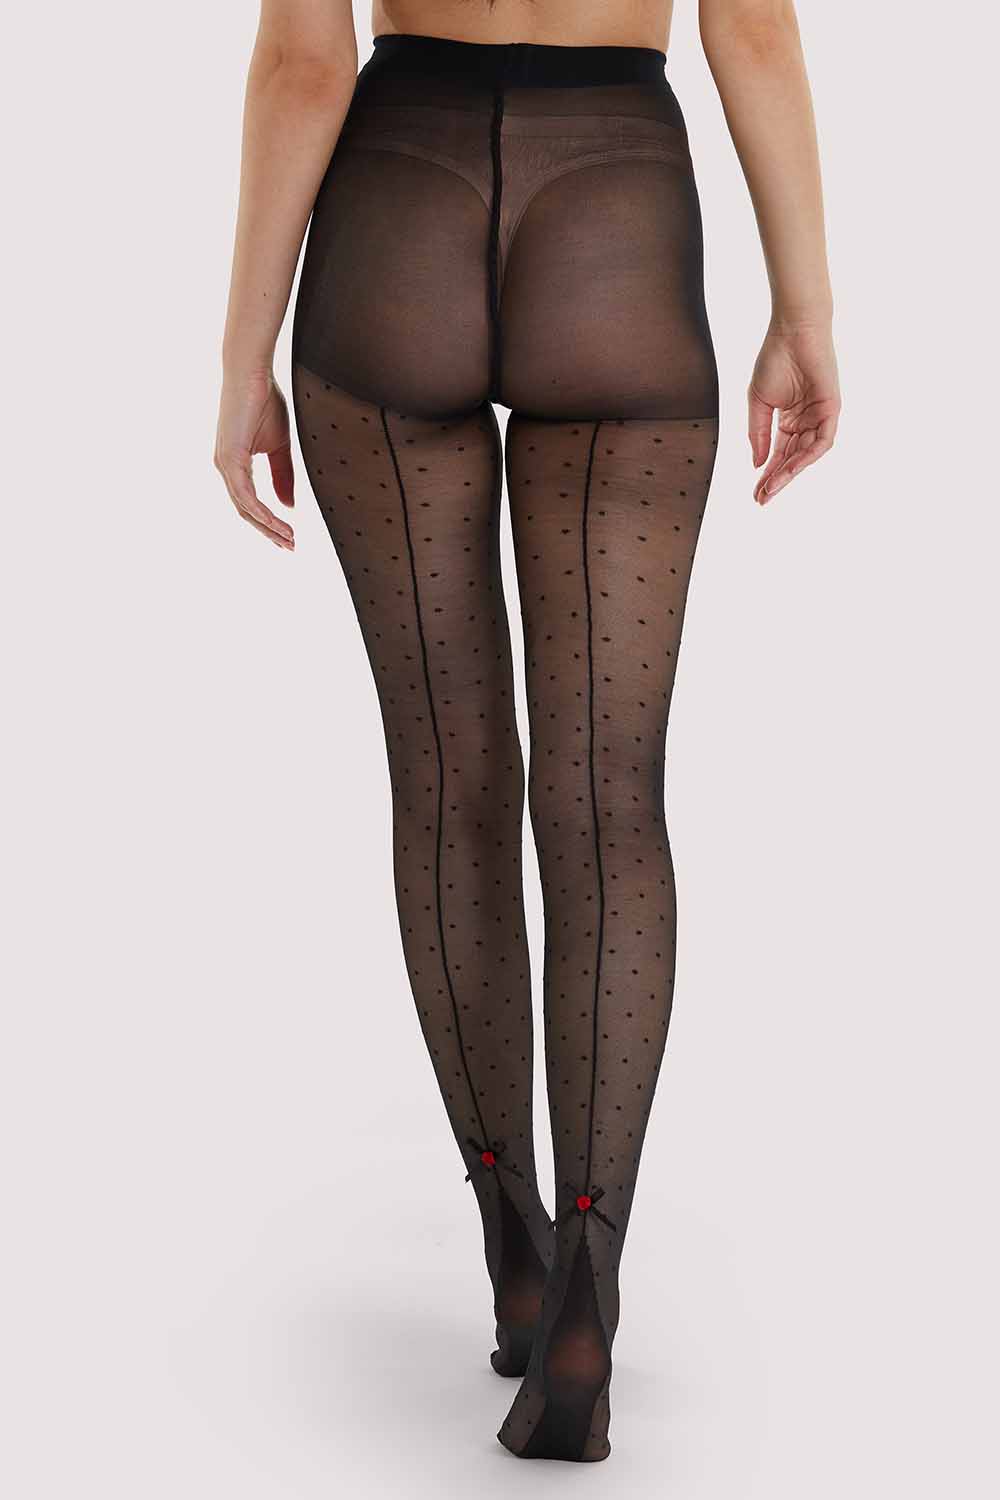 Women's Black Double Knitted Fence Net Pantyhose